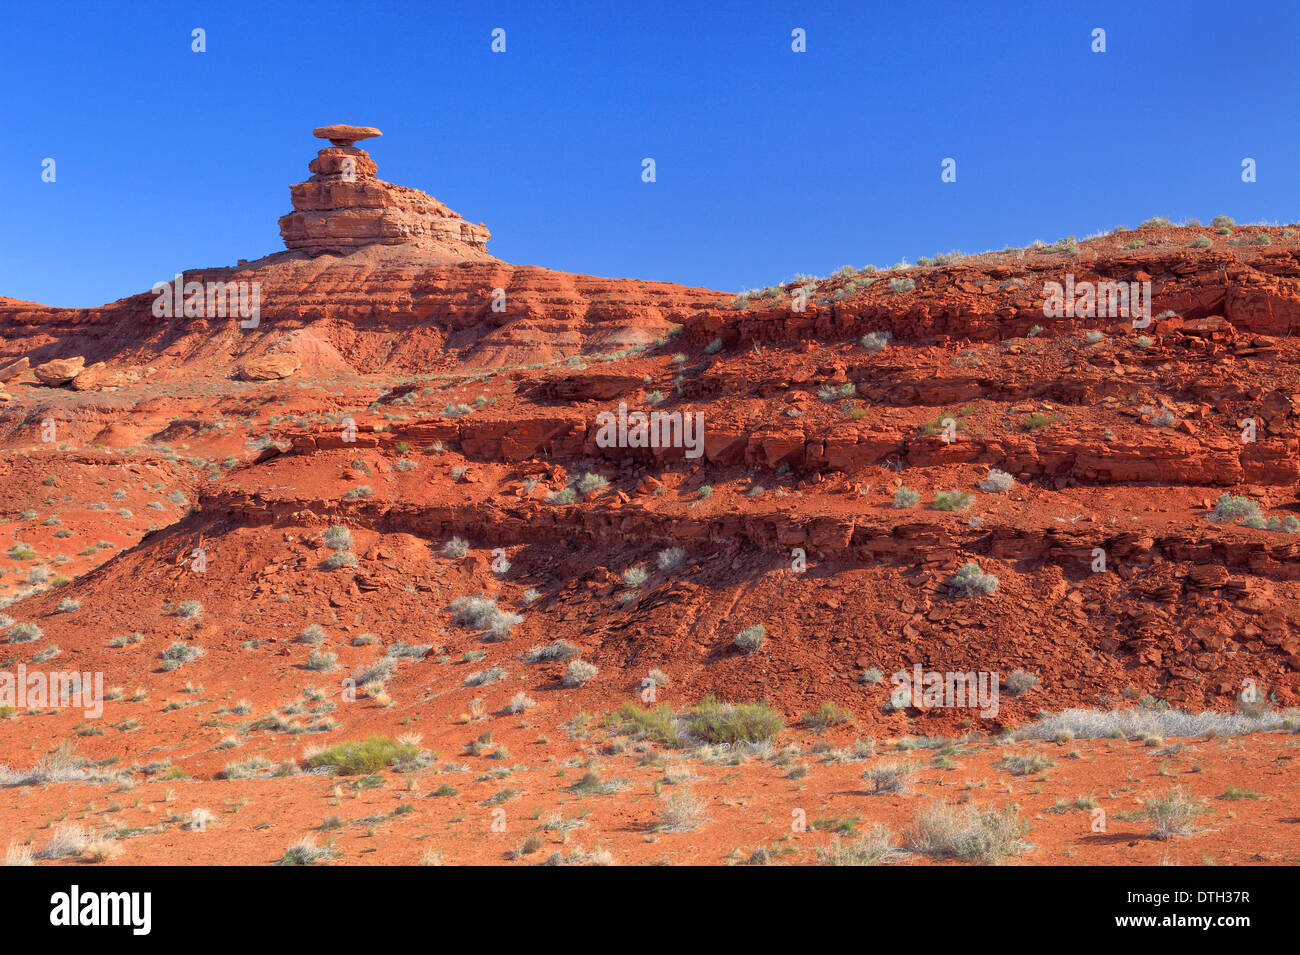 Mexican Hat, Monument Valley, Utah, USA Stockfoto